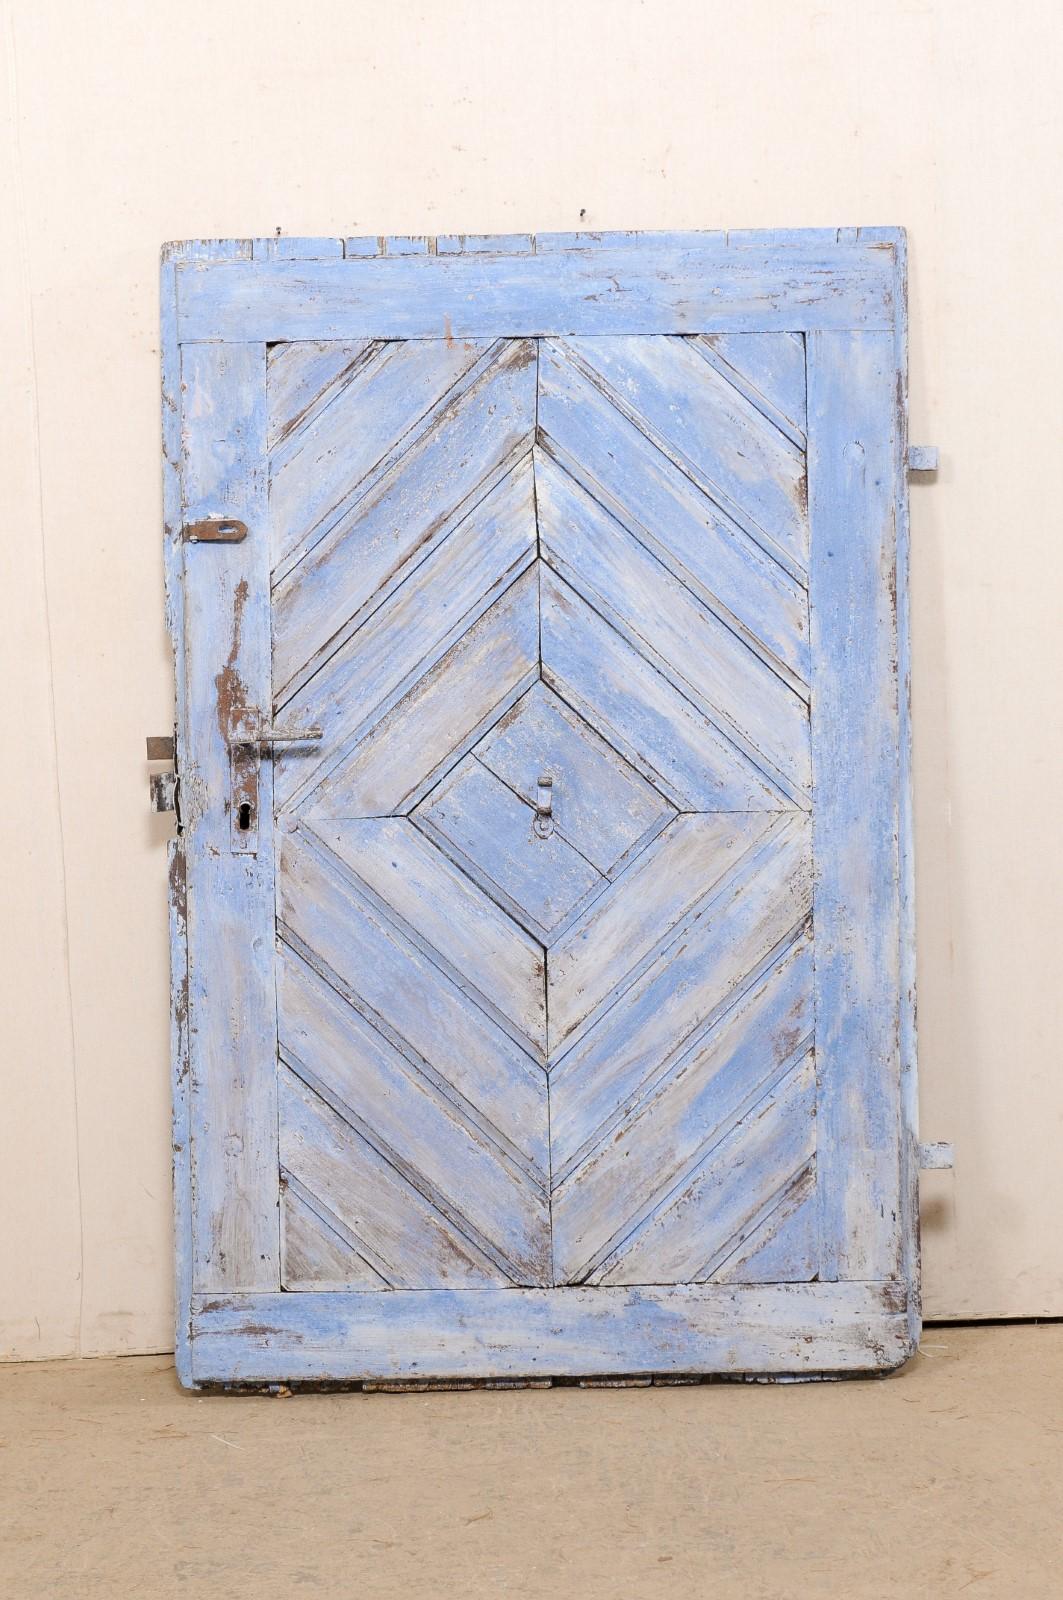 A Spanish painted wood door (which would make a great headboard) from the 19th century. This antique door from Spain has a diamond pattern front facing facade, created from boards, and central diamond has a forged iron hook- perhaps originally used